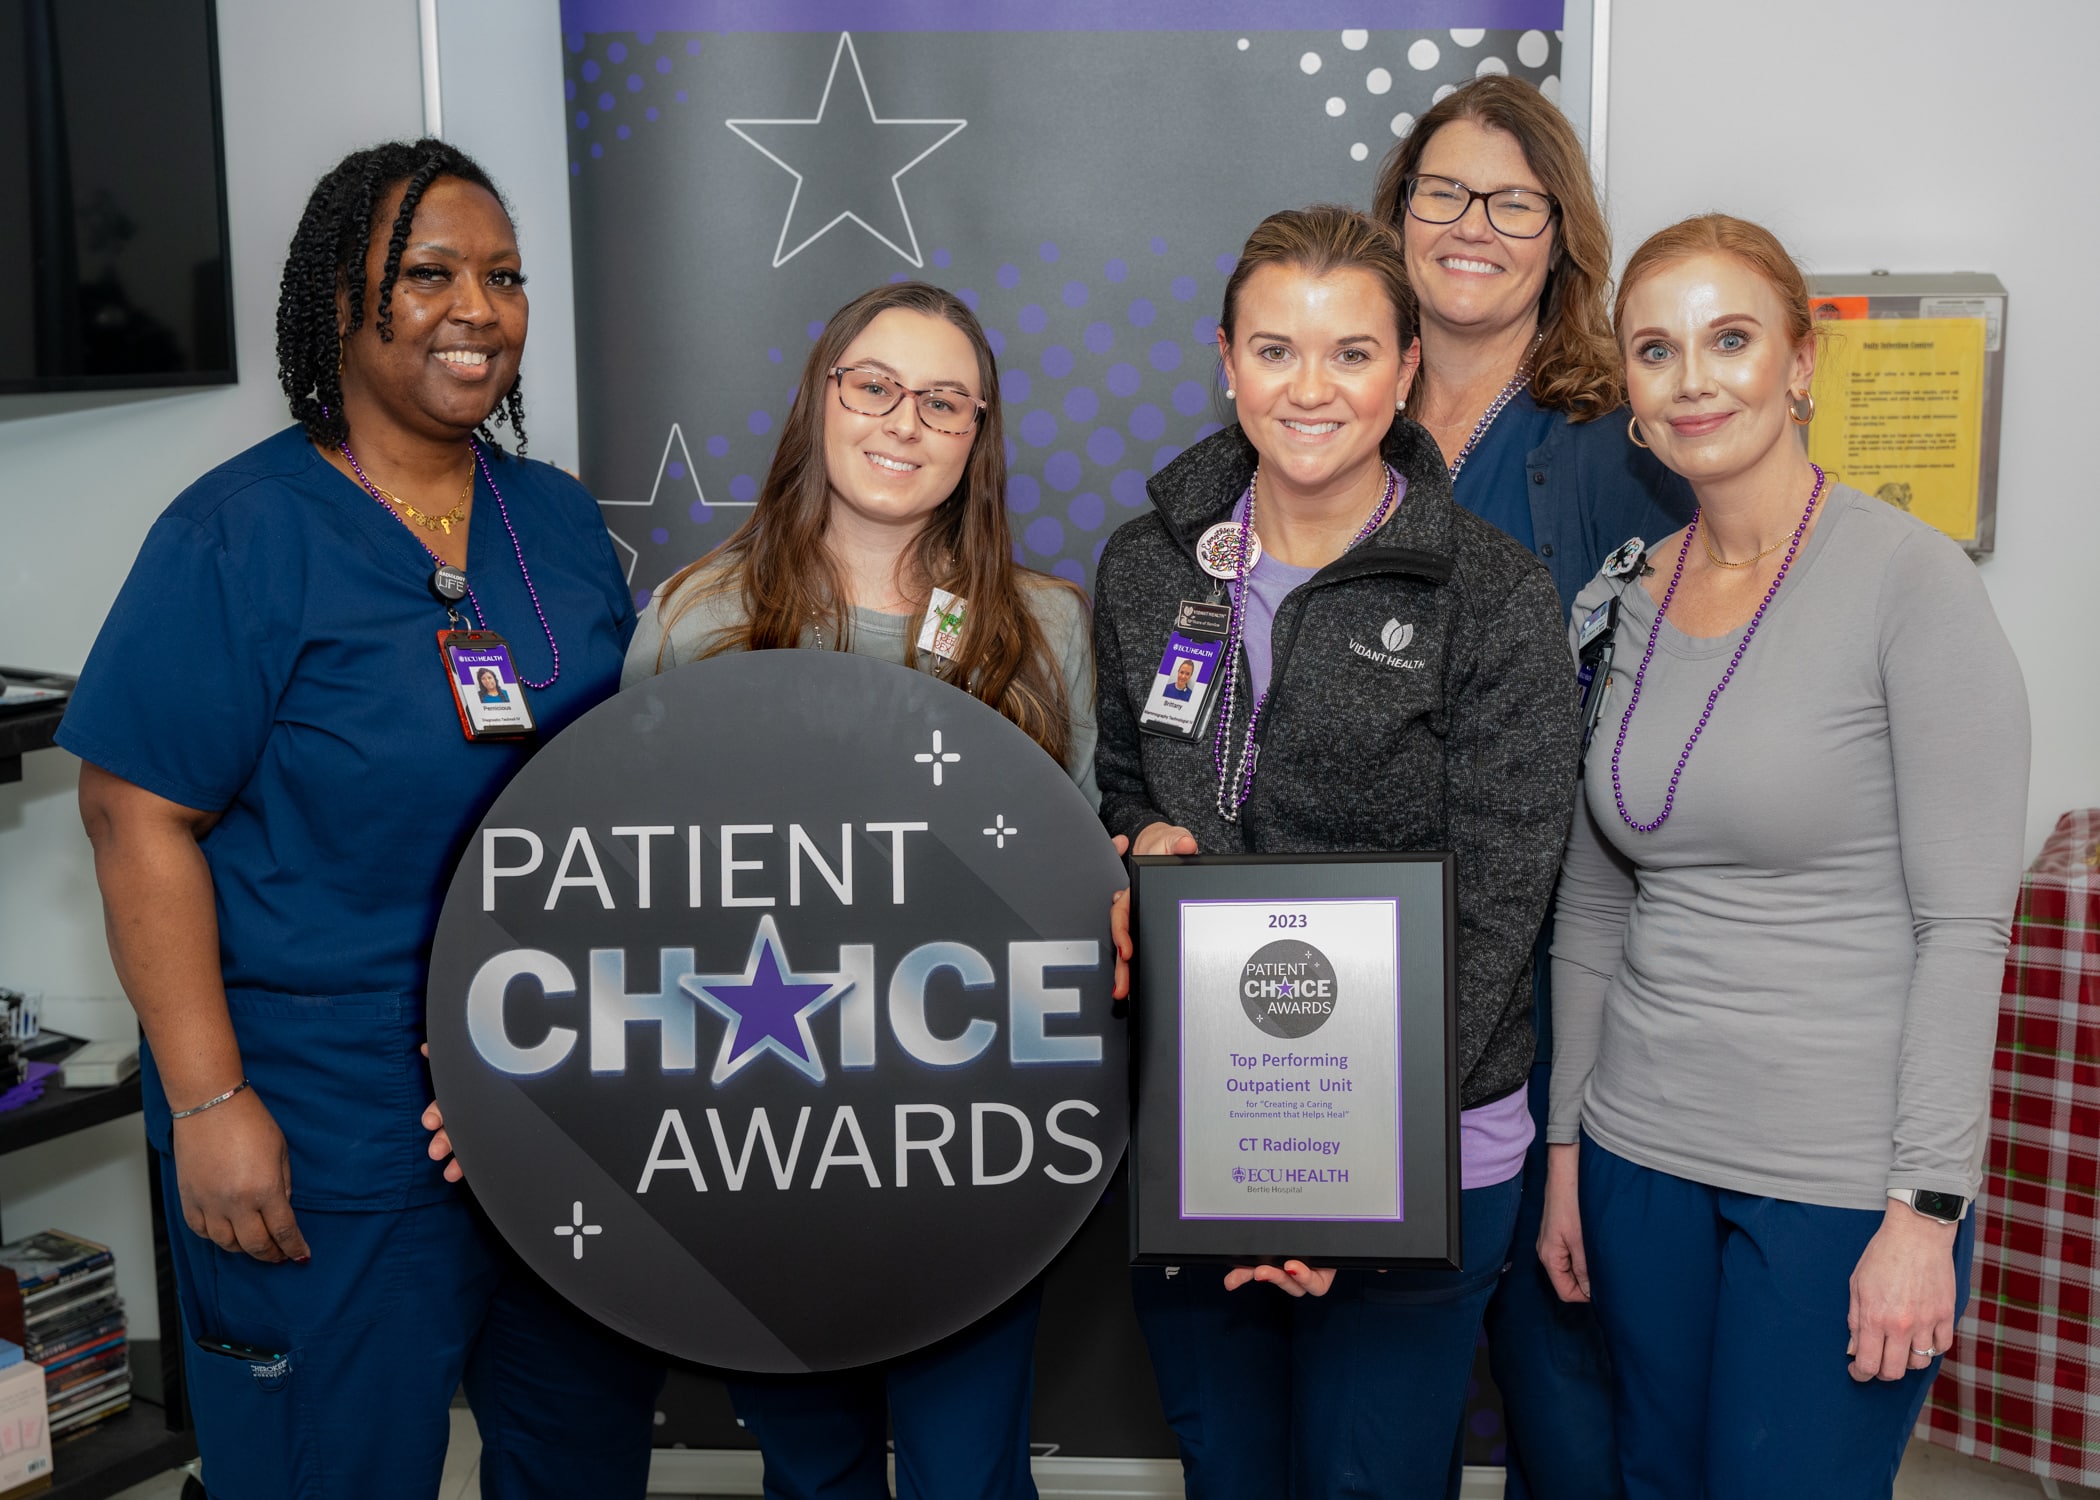 The ECU Health Bertie Hospital CT Radiology team gathers to celebrate their Patient Choice Award.